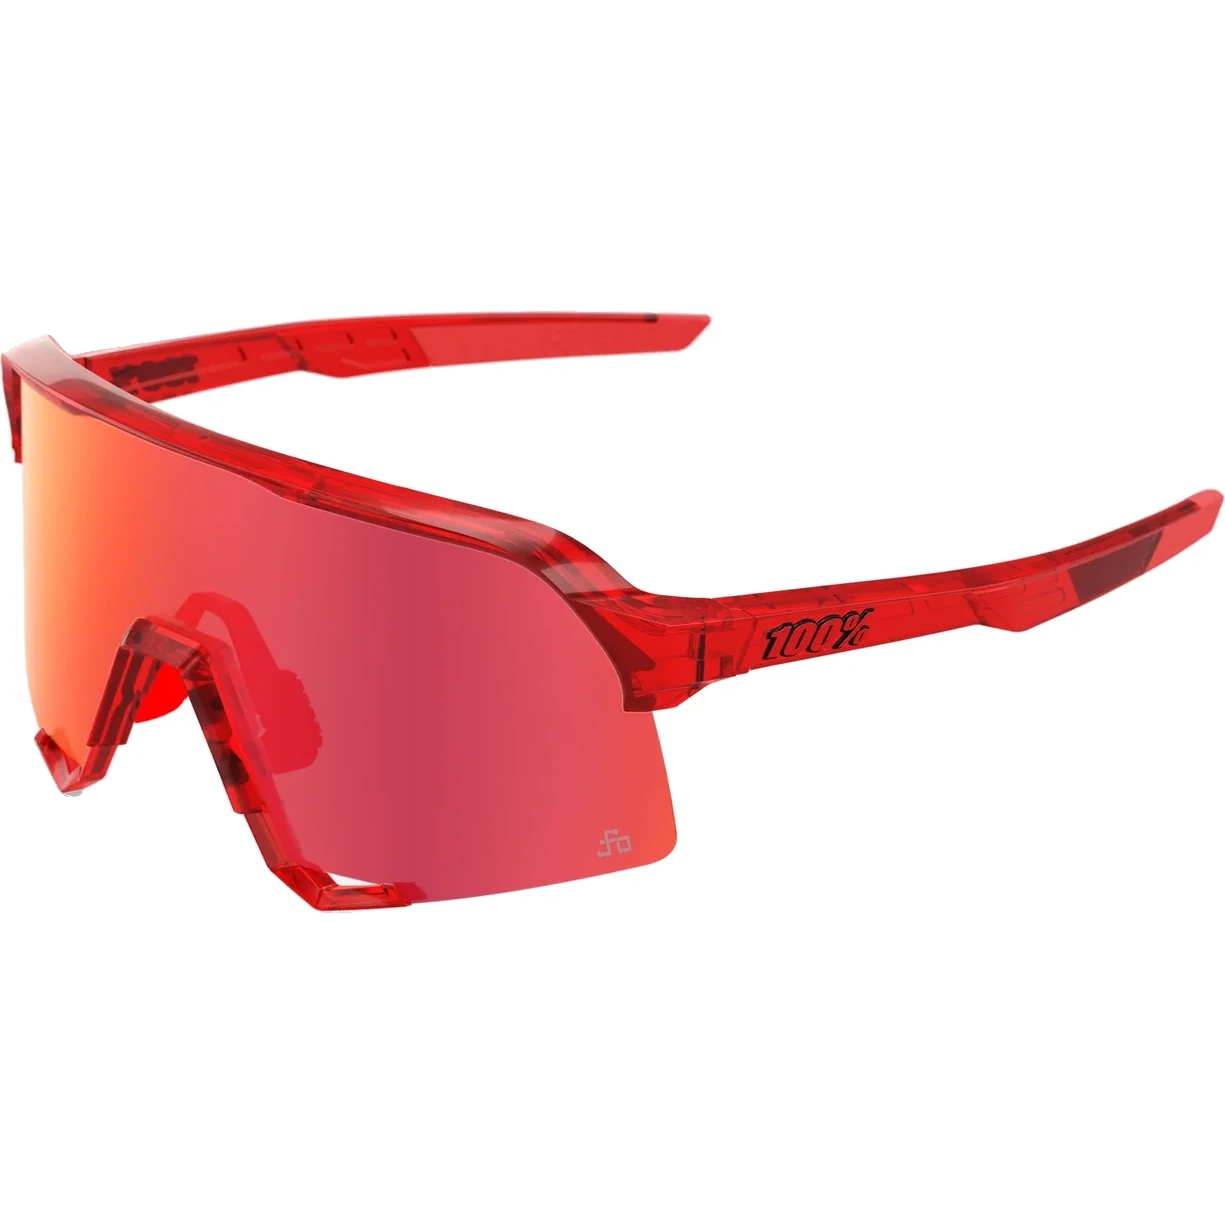 Productfoto van 100% S3 LE Bril - HiPER Red Mirror Lens - Peter Sagan Limited Edition - Translucent Red